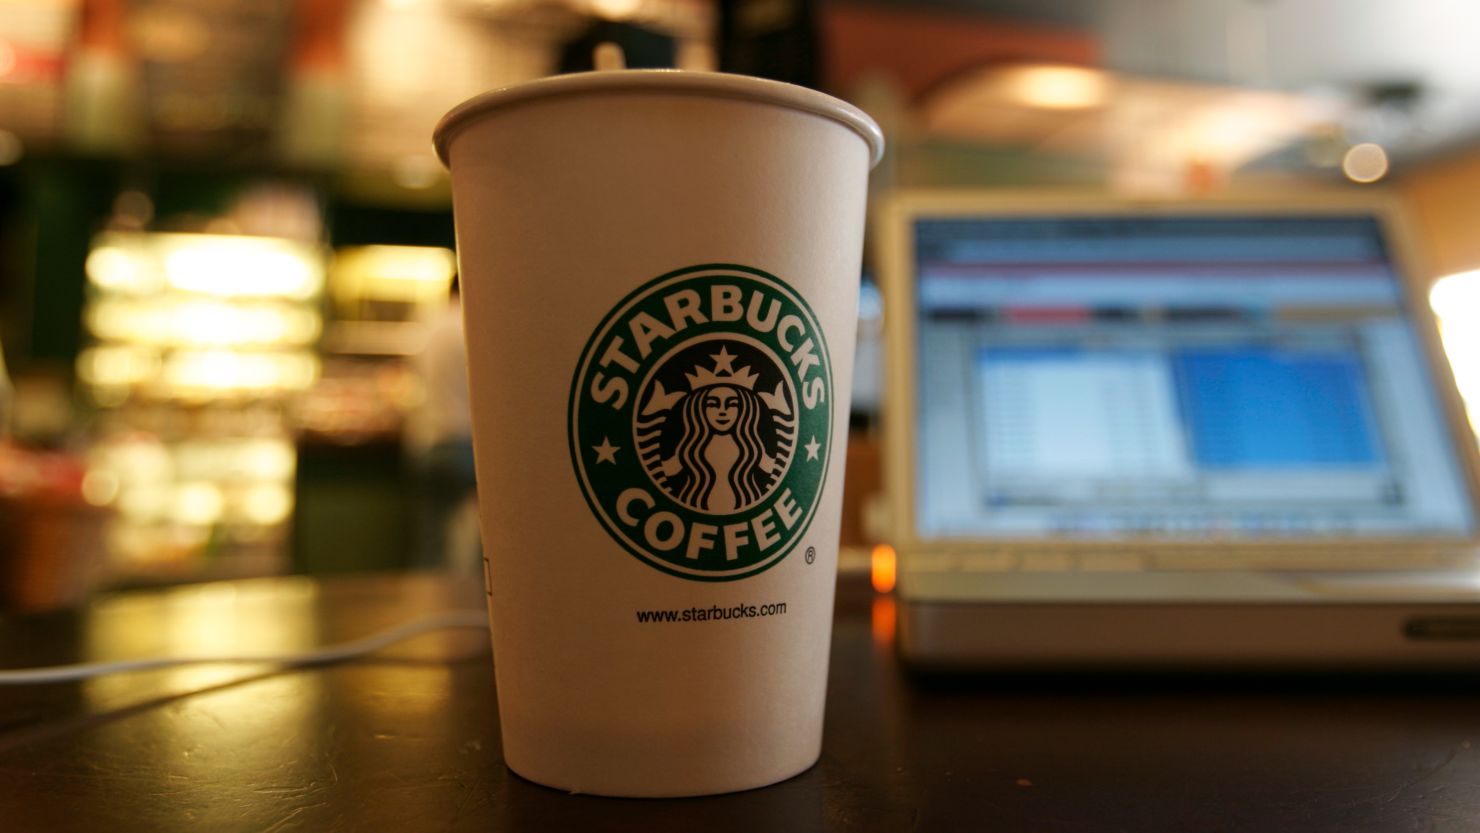 Starbucks' Ethically Sourced Coffee and Tea Claims - Truth in Advertising